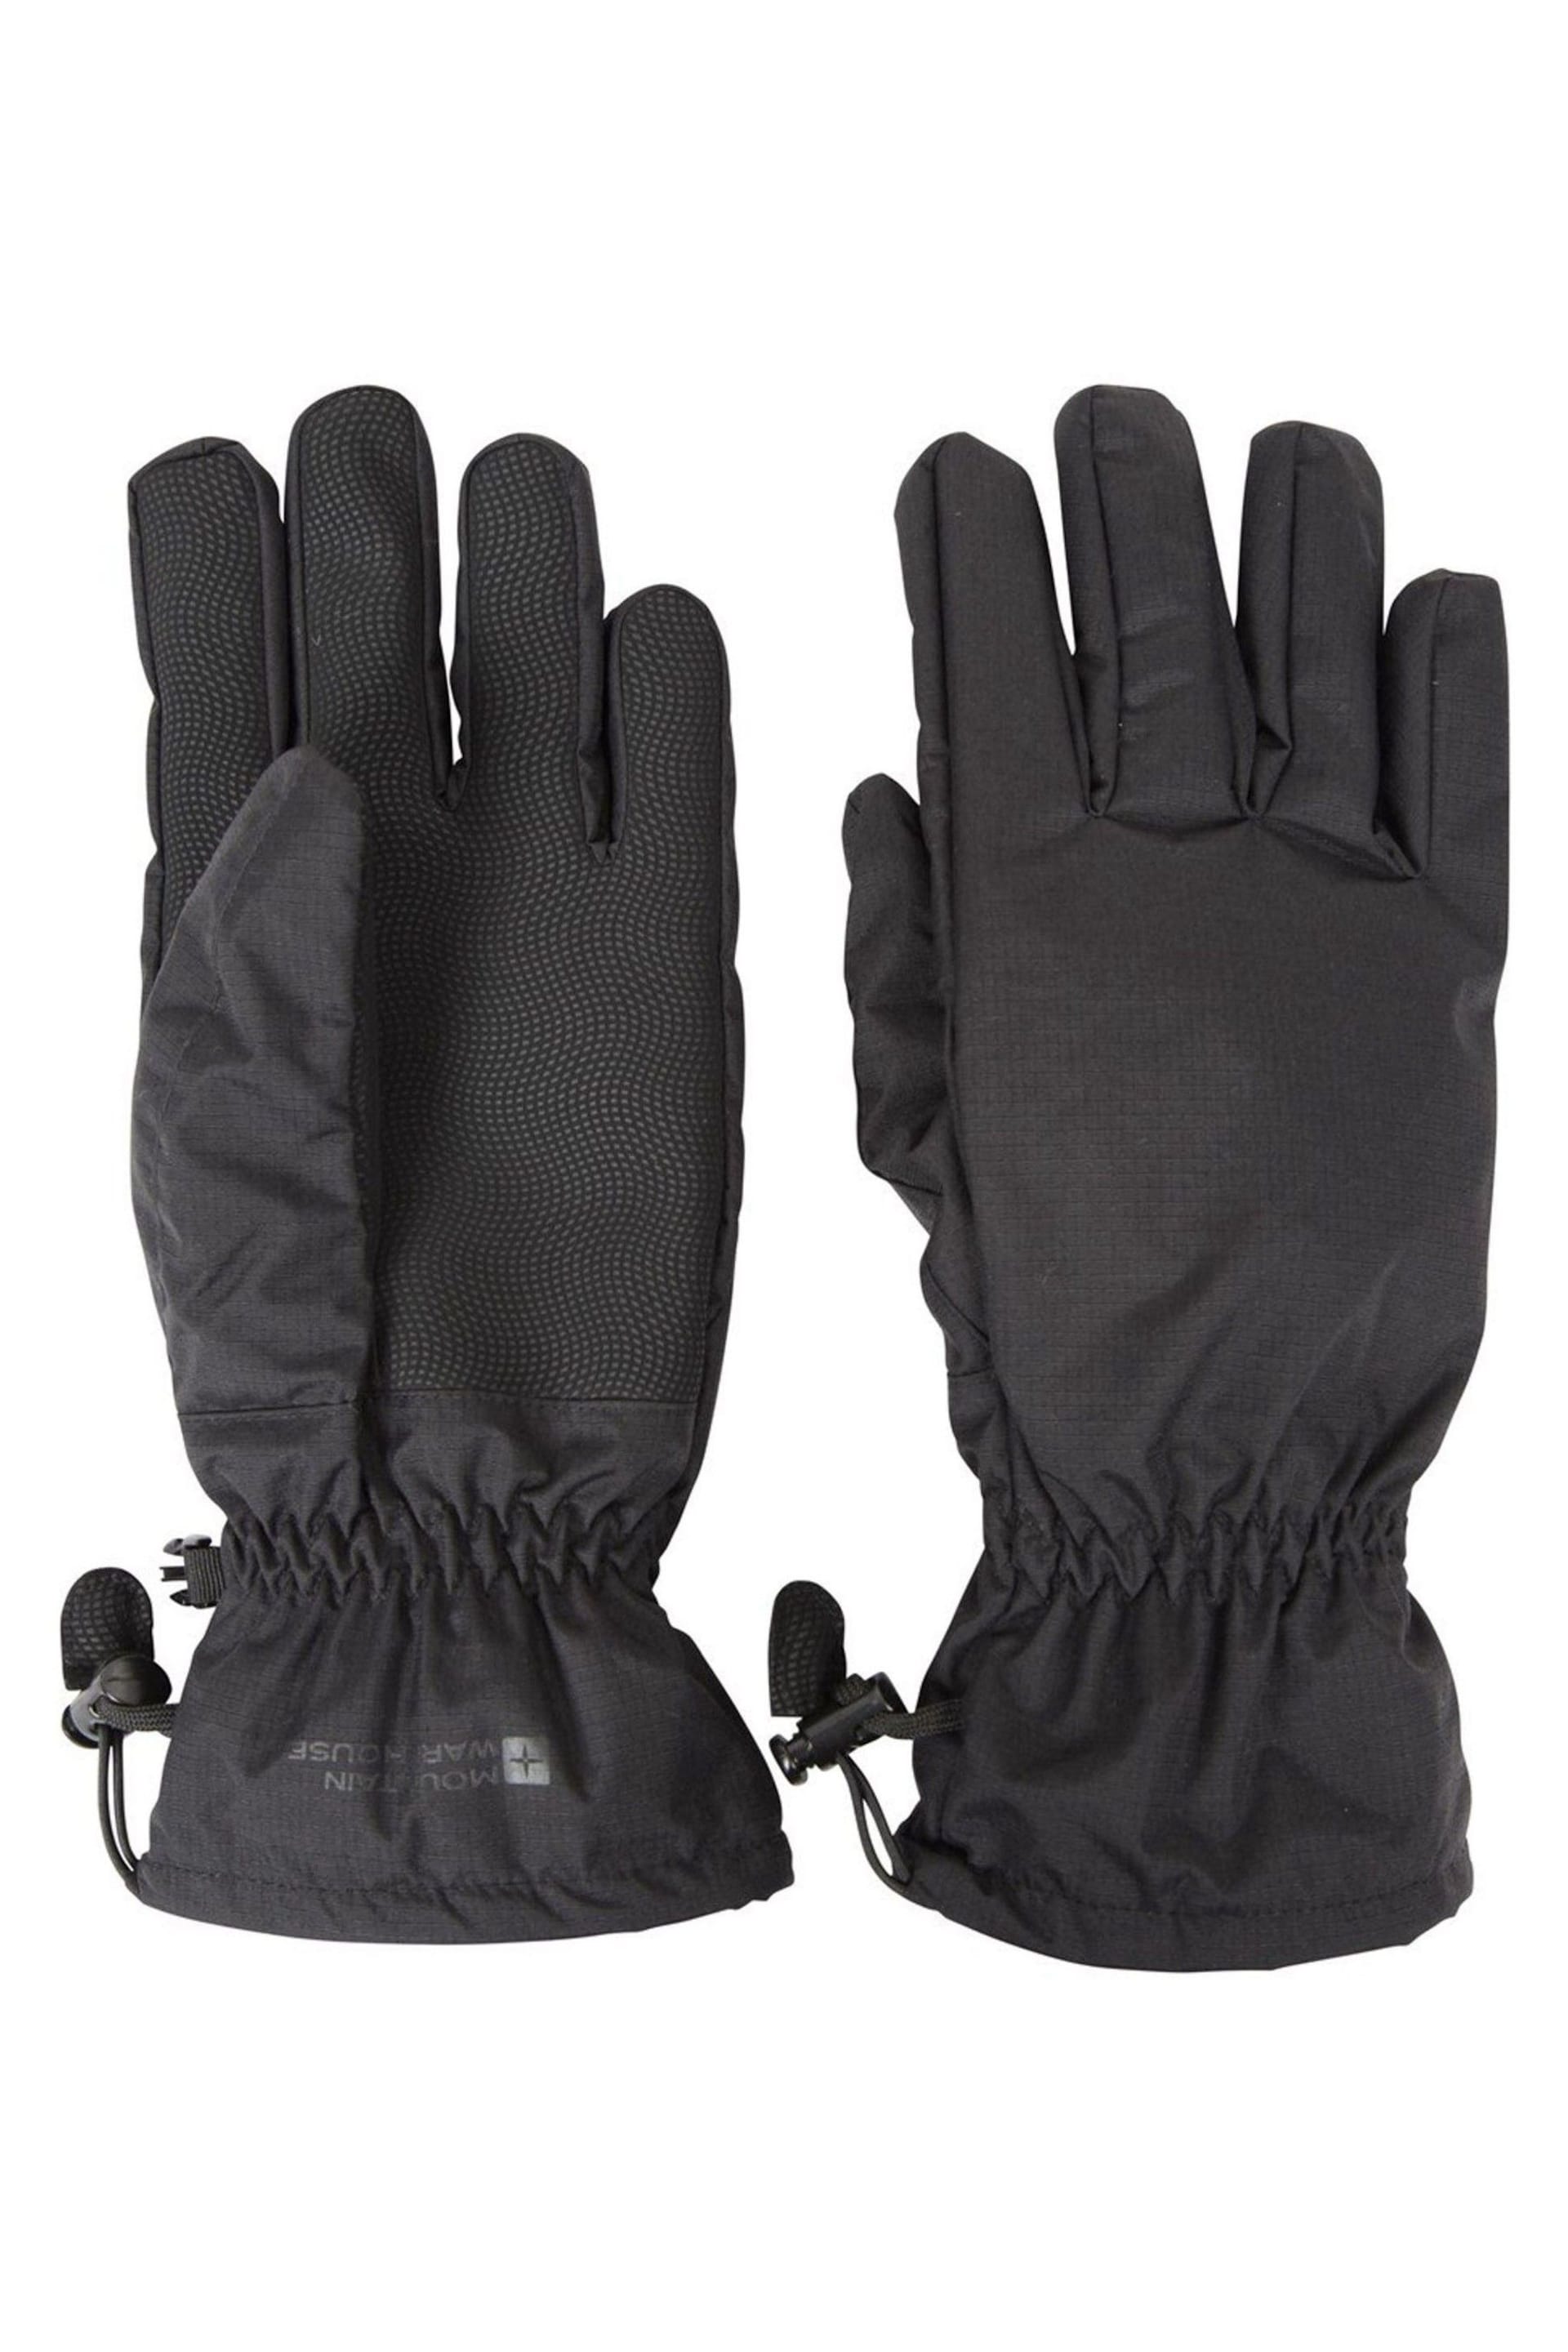 Mountain Warehouse Black Classic Waterproof Gloves - Image 2 of 3